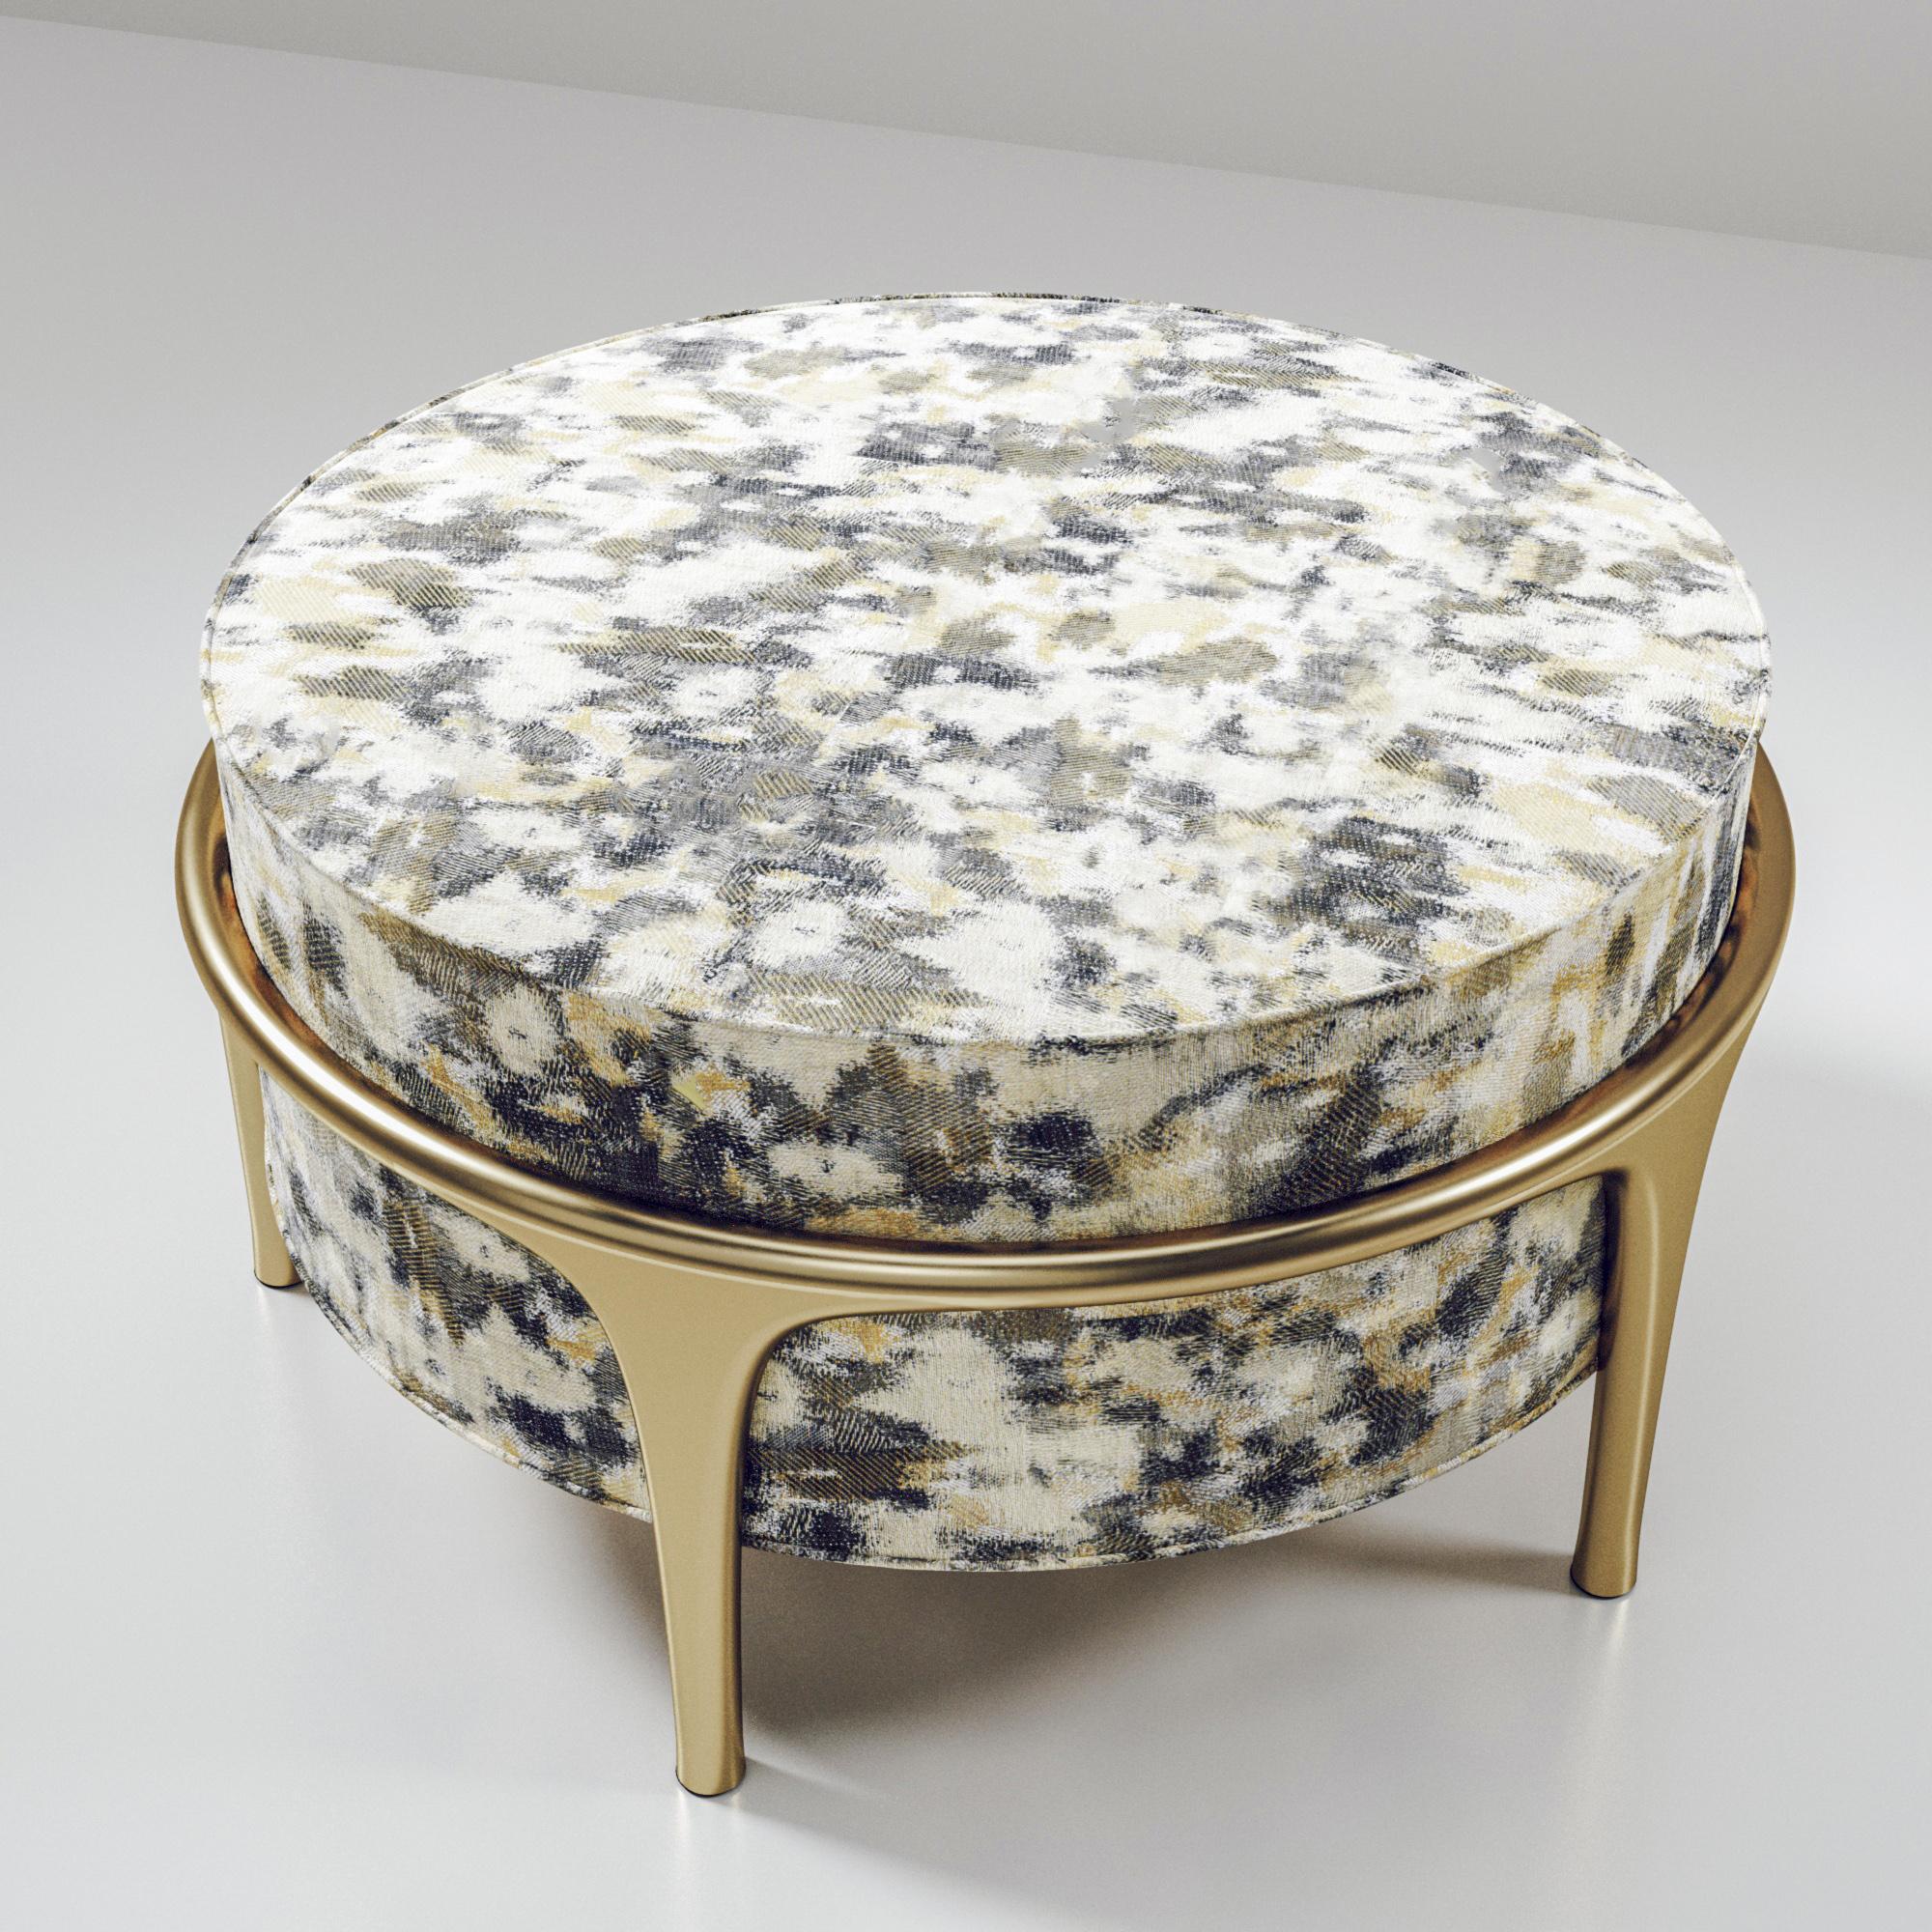 The Ramo Ottoman by R & Y Augousti is an elegant and versatile piece. The upholstered piece in a camouflage Pierre Frey fabric provides comfort while retaining a unique aesthetic with the bronze-patina brass frame and details. This listing is priced